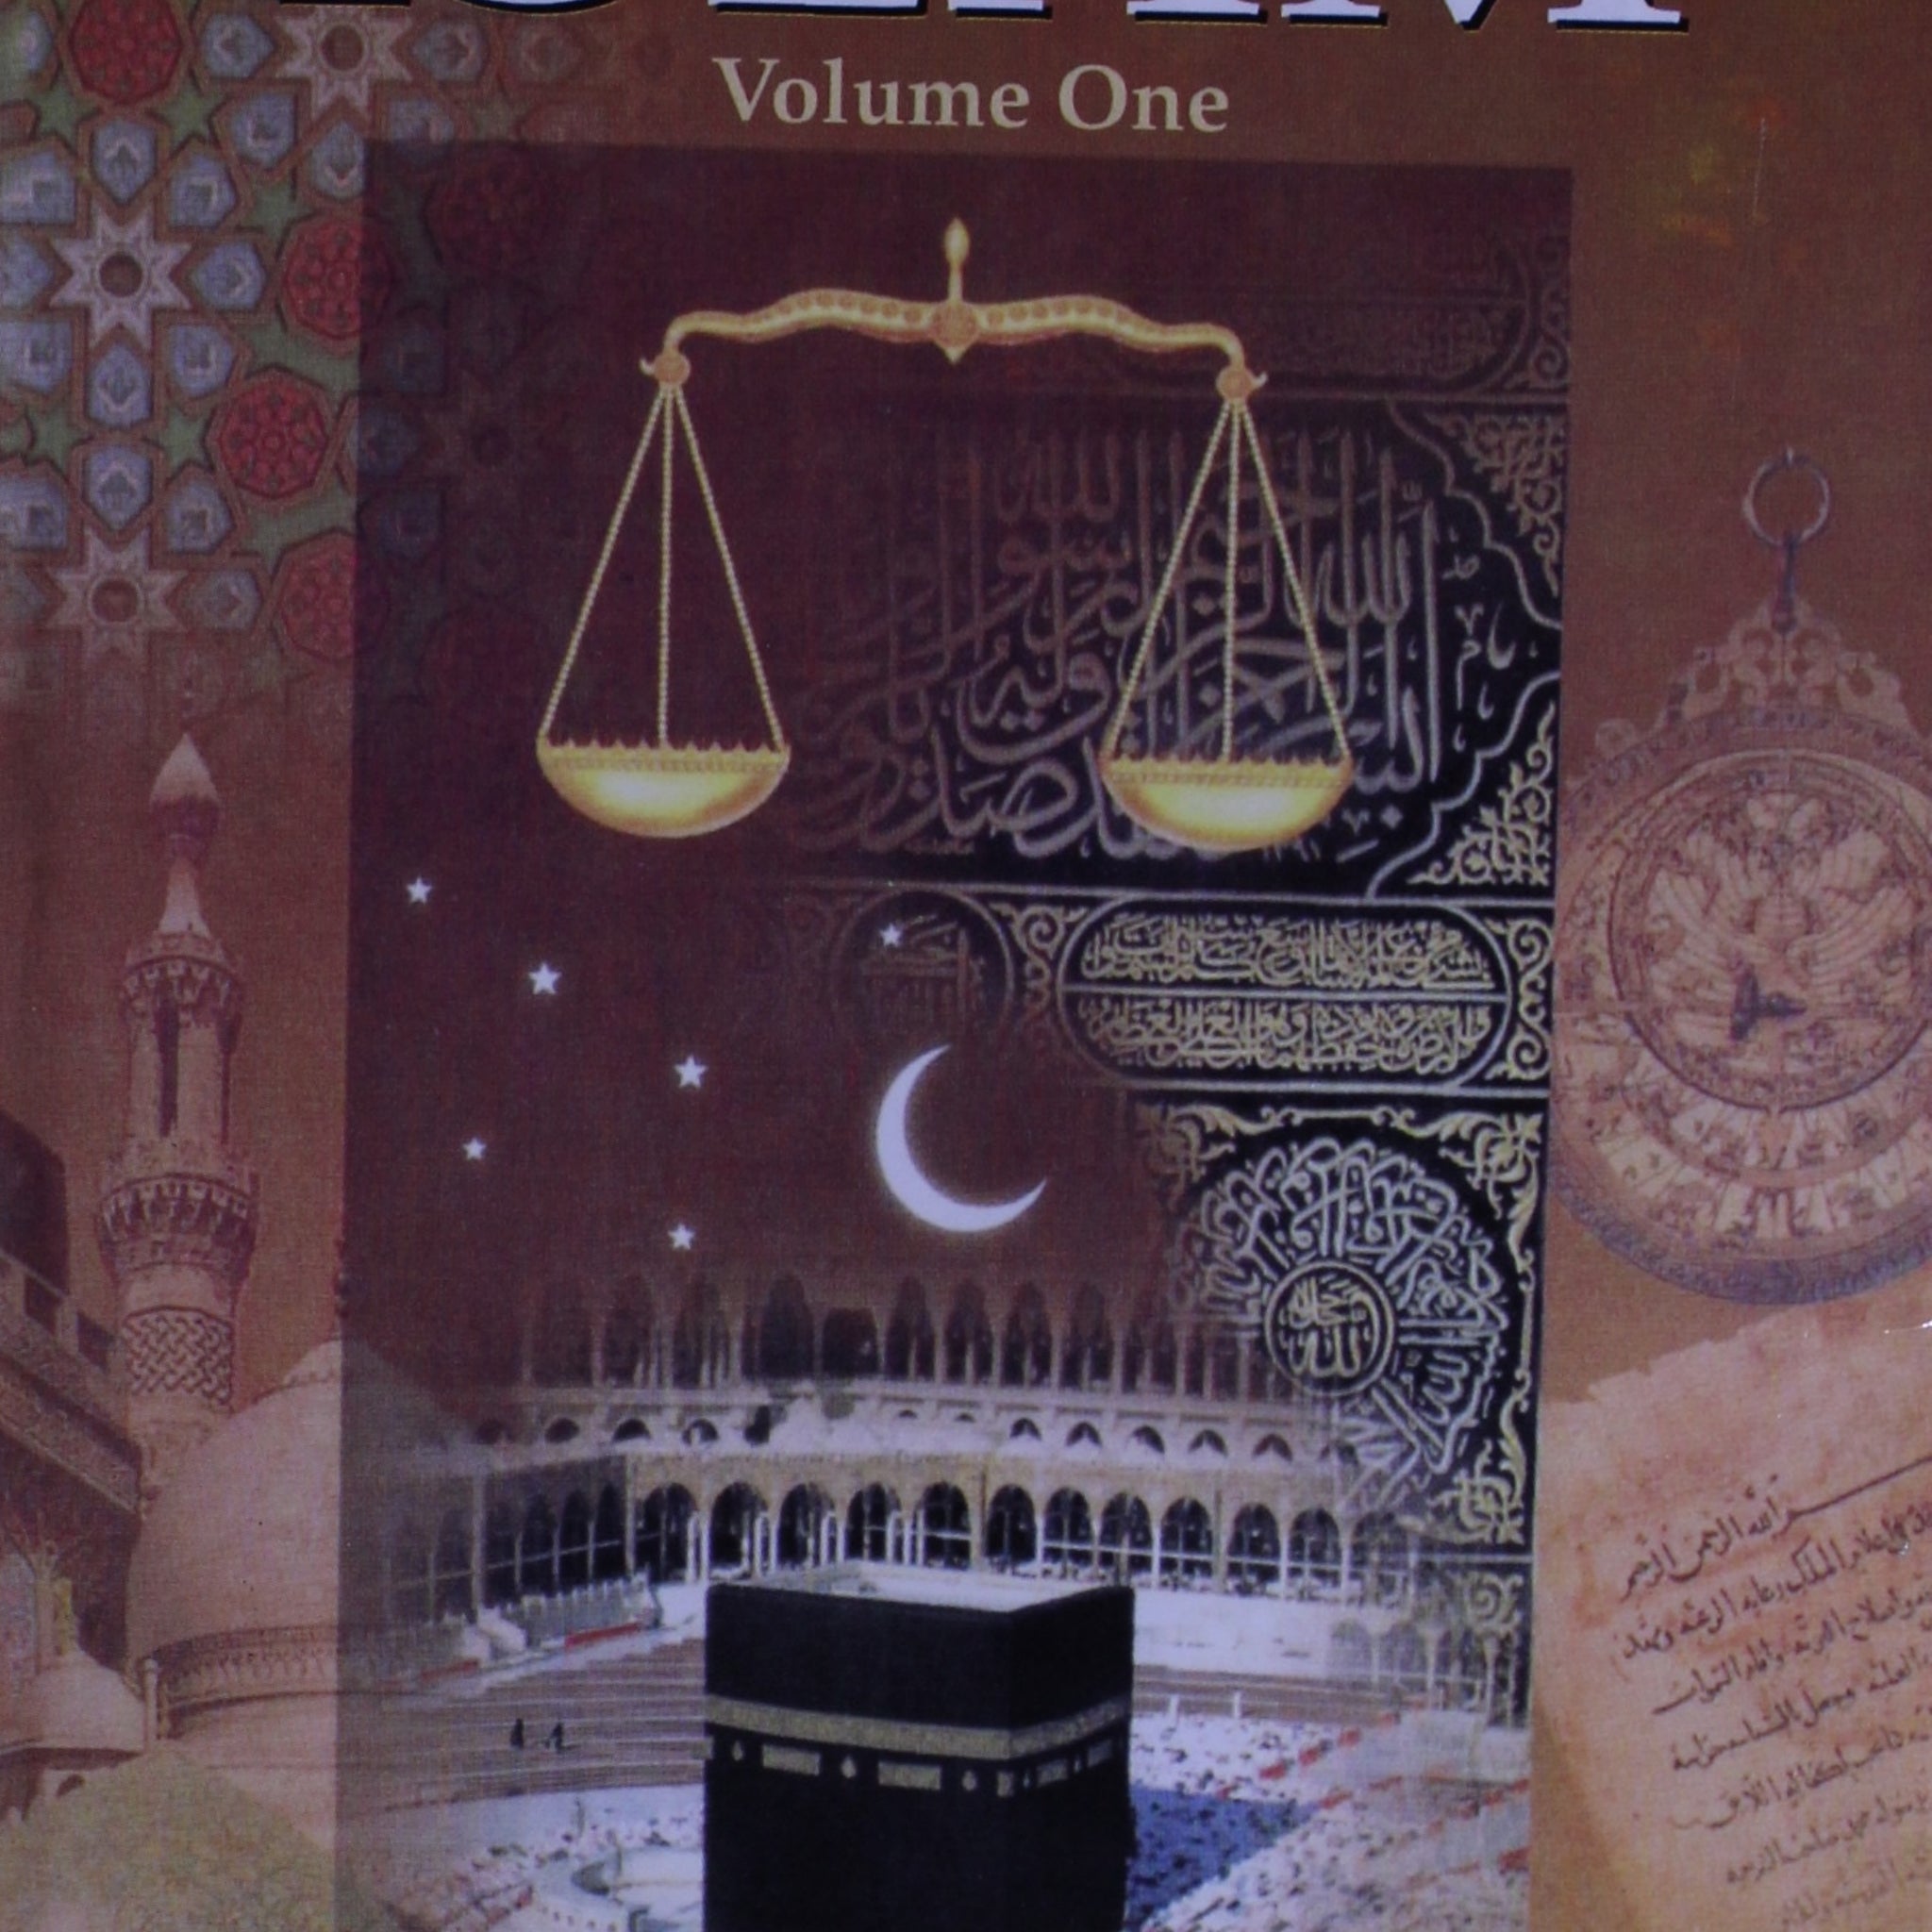 The History Of Islam ( Vol.1 )